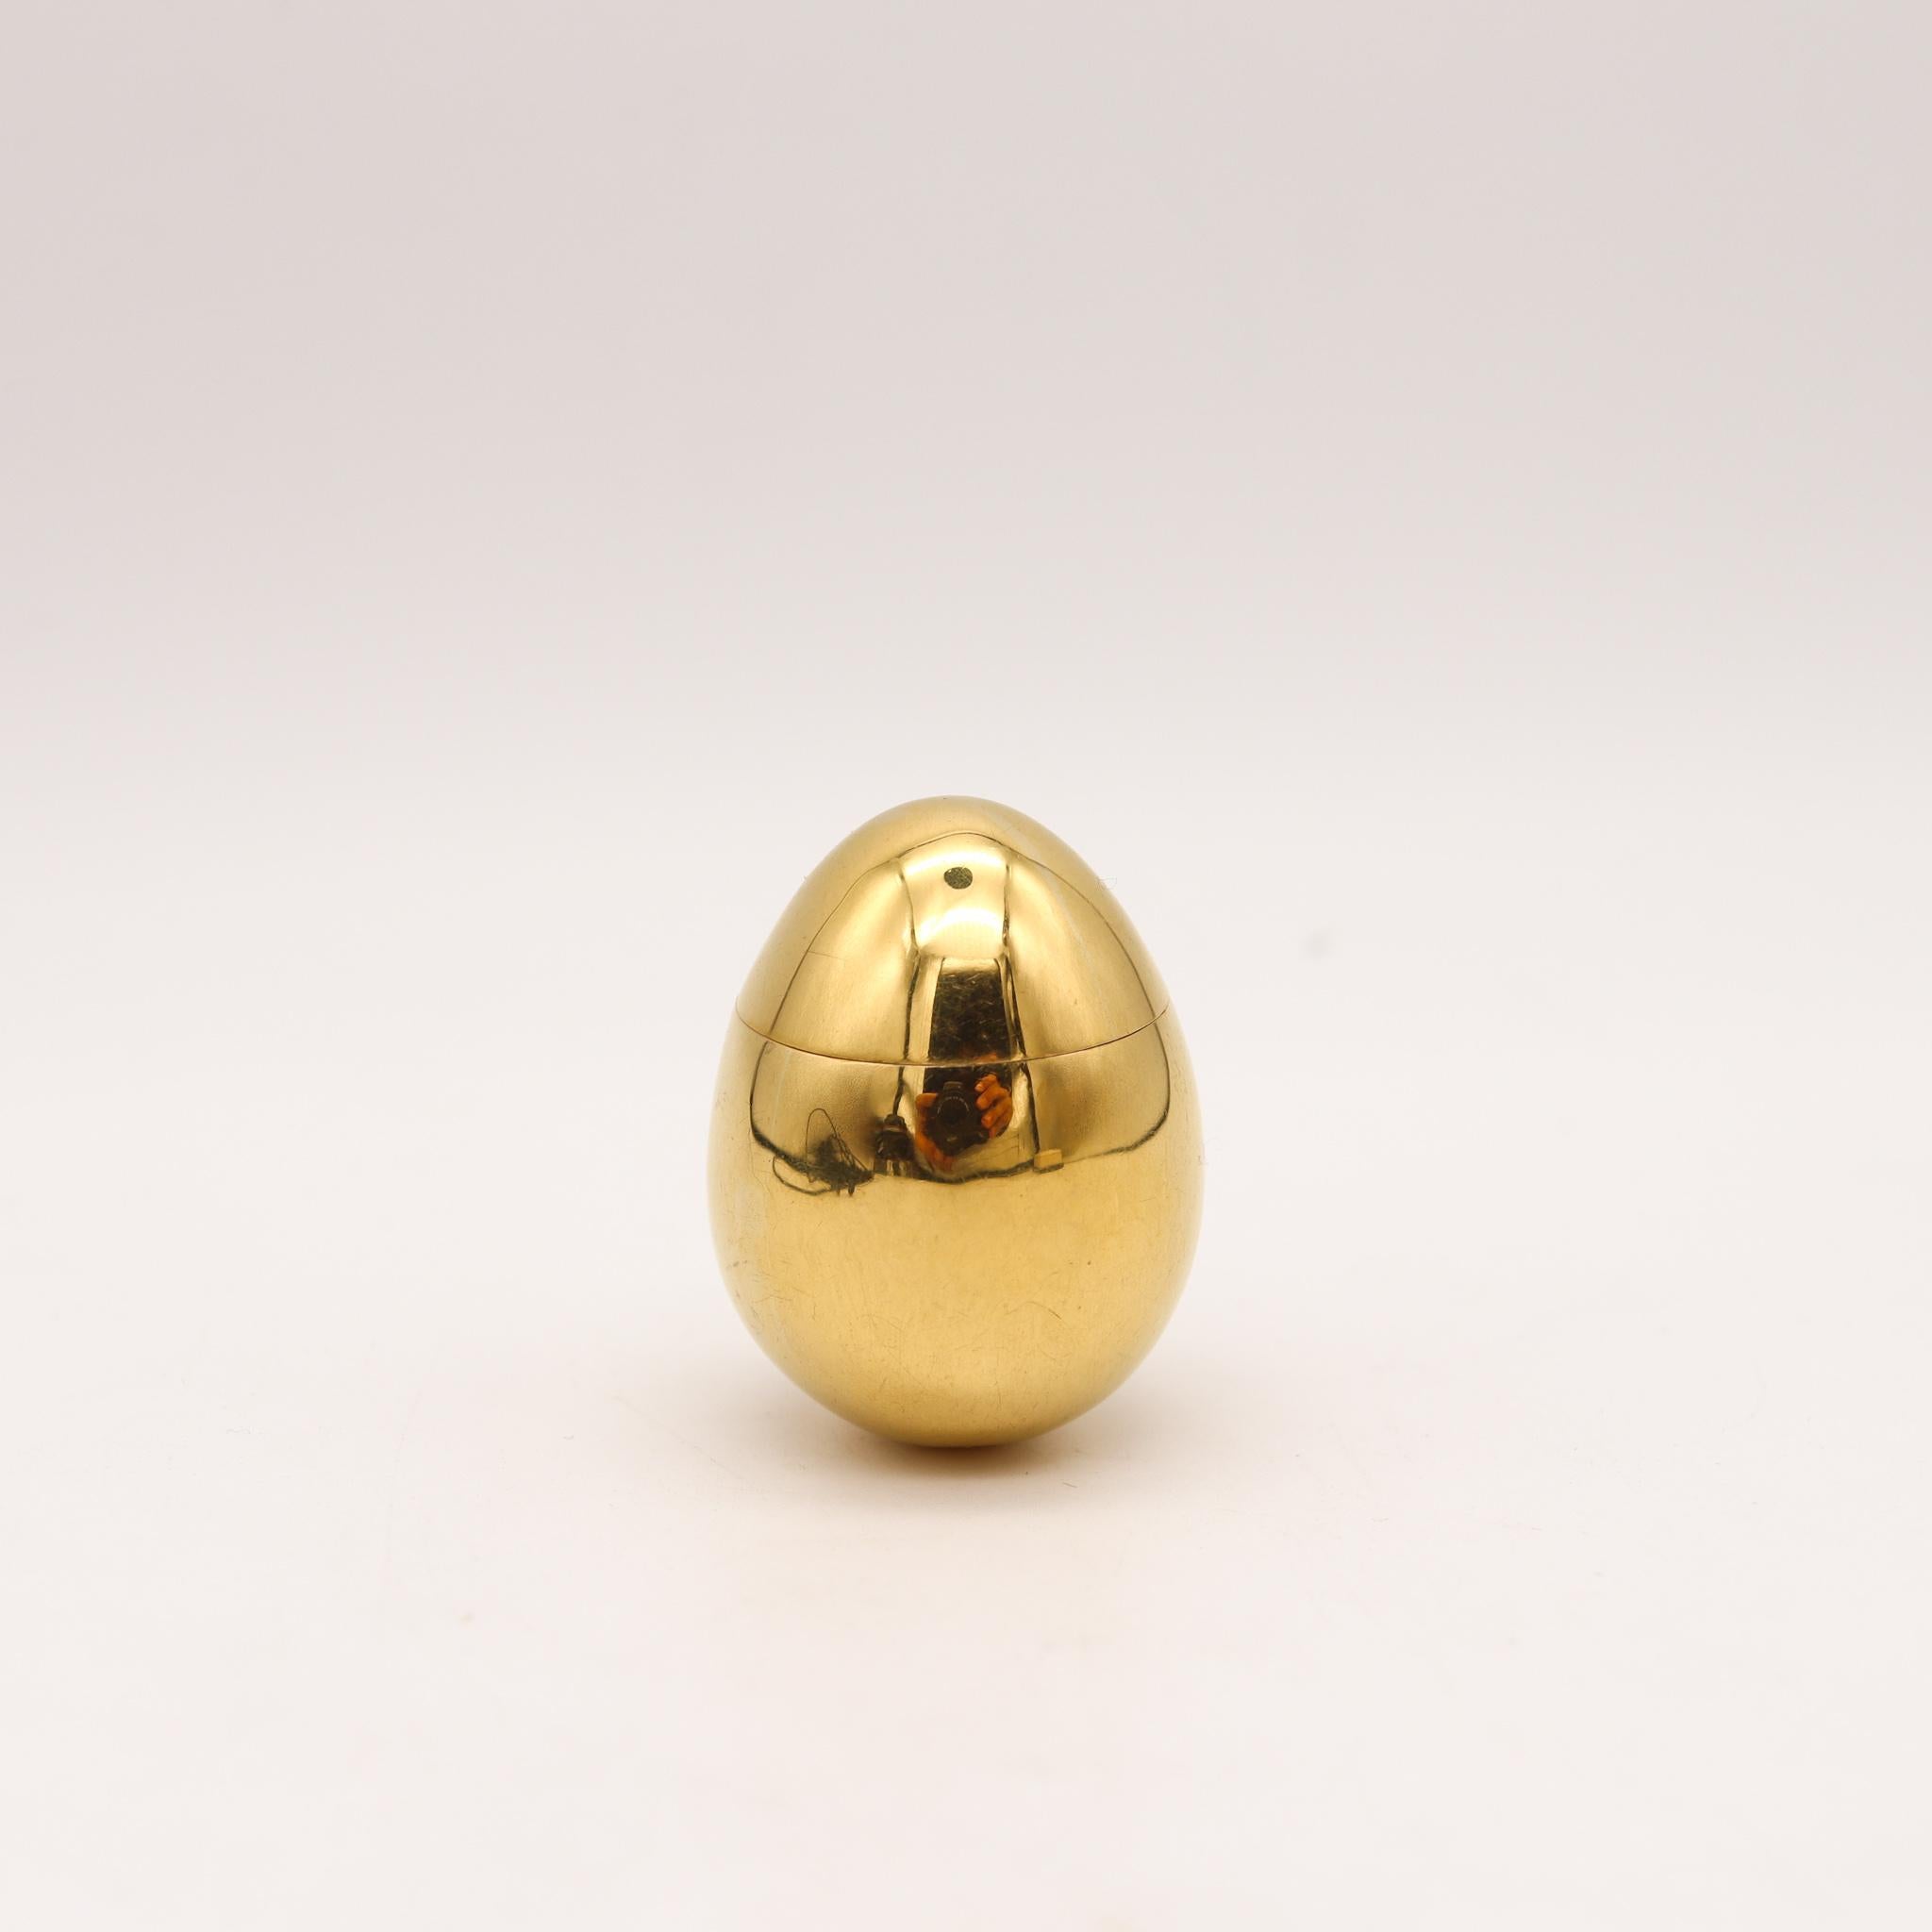 Cartier 1970 London Easter Egg Box Sautoir Necklace in 18kt Gold & Black Silk In Excellent Condition For Sale In Miami, FL